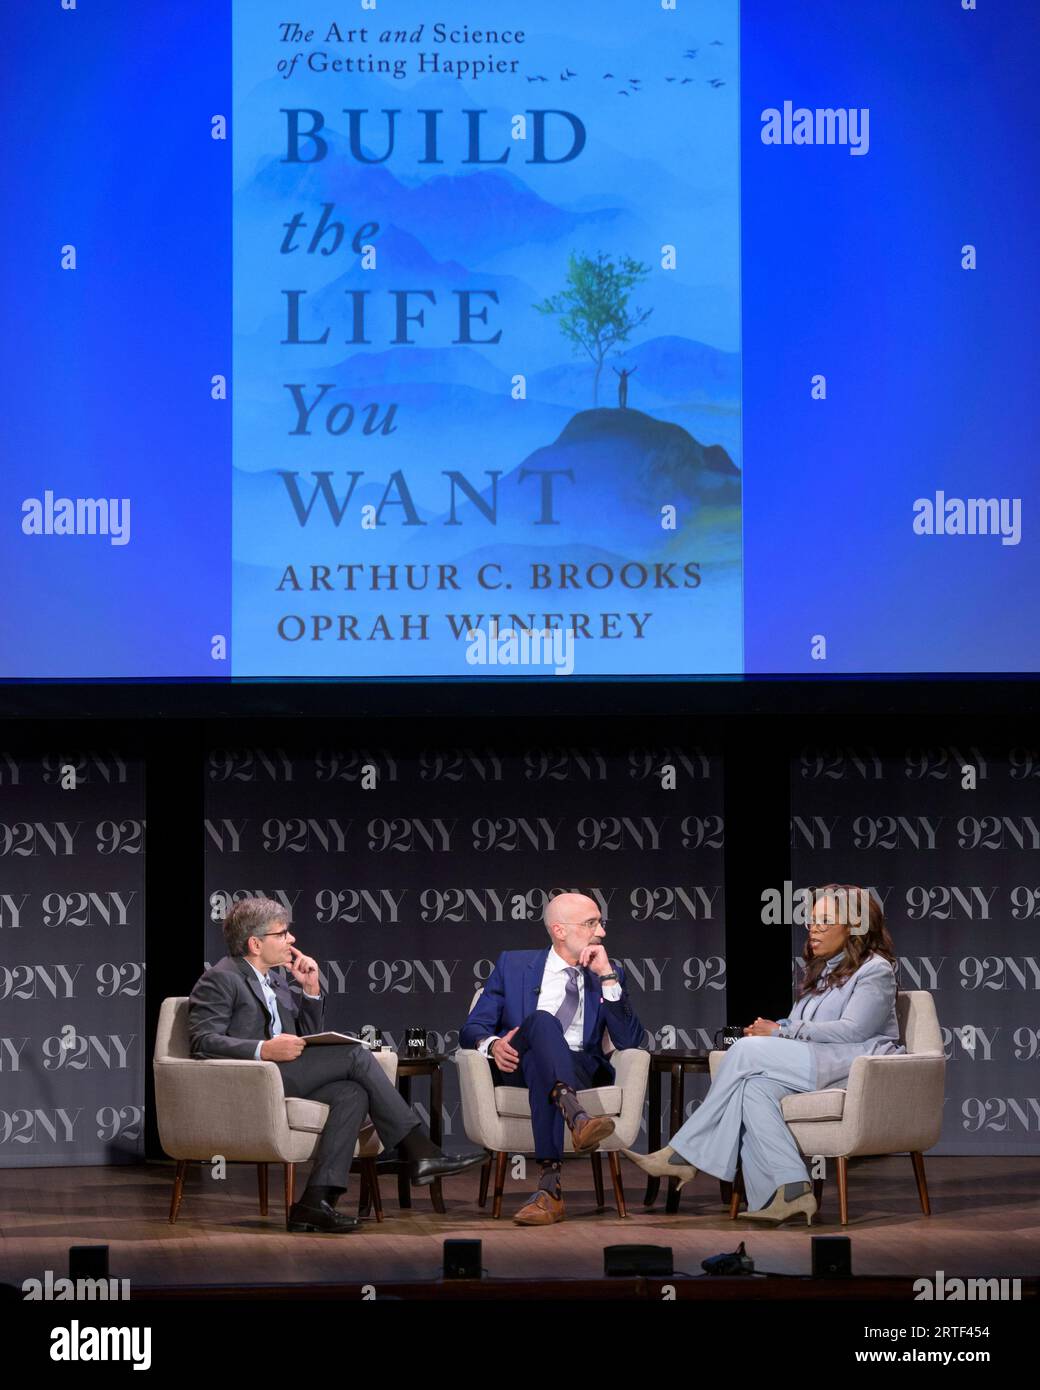 https://c8.alamy.com/comp/2RTF454/george-stephanopoulos-from-left-arthur-c-brooks-and-oprah-winfrey-discuss-their-new-book-building-the-life-you-want-the-art-and-science-of-getting-happier-at-the-92nd-street-y-on-tuesday-sept-12-2023-in-new-york-photo-by-christopher-smithinvisionap-2RTF454.jpg